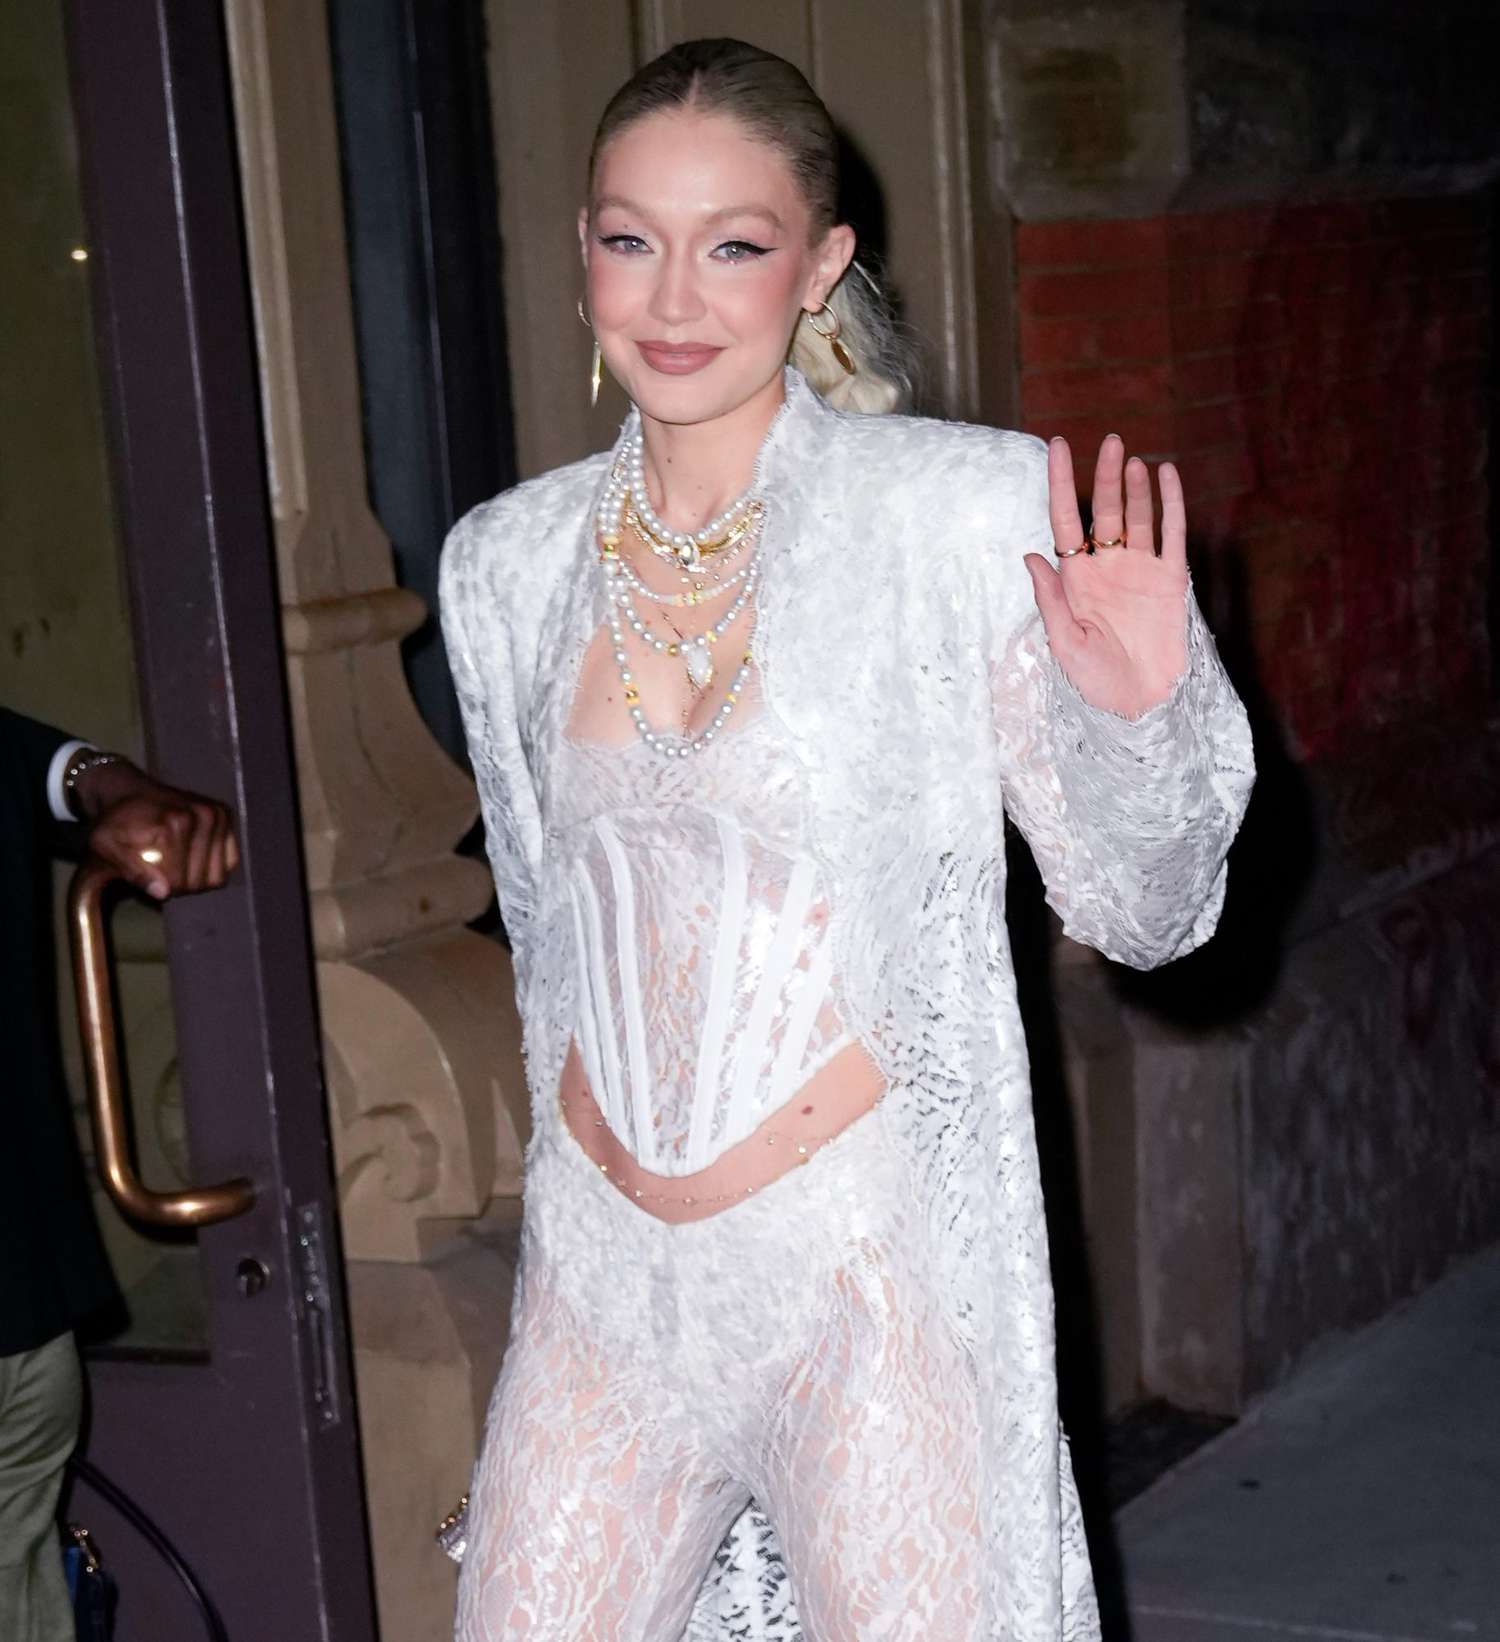 NEW YORK, NEW YORK - APRIL 23: Gigi Hadid arrives at her 27th birthday party at Zero Bondon April 23, 2022 in New York City. (Photo by Gotham/GC Images)